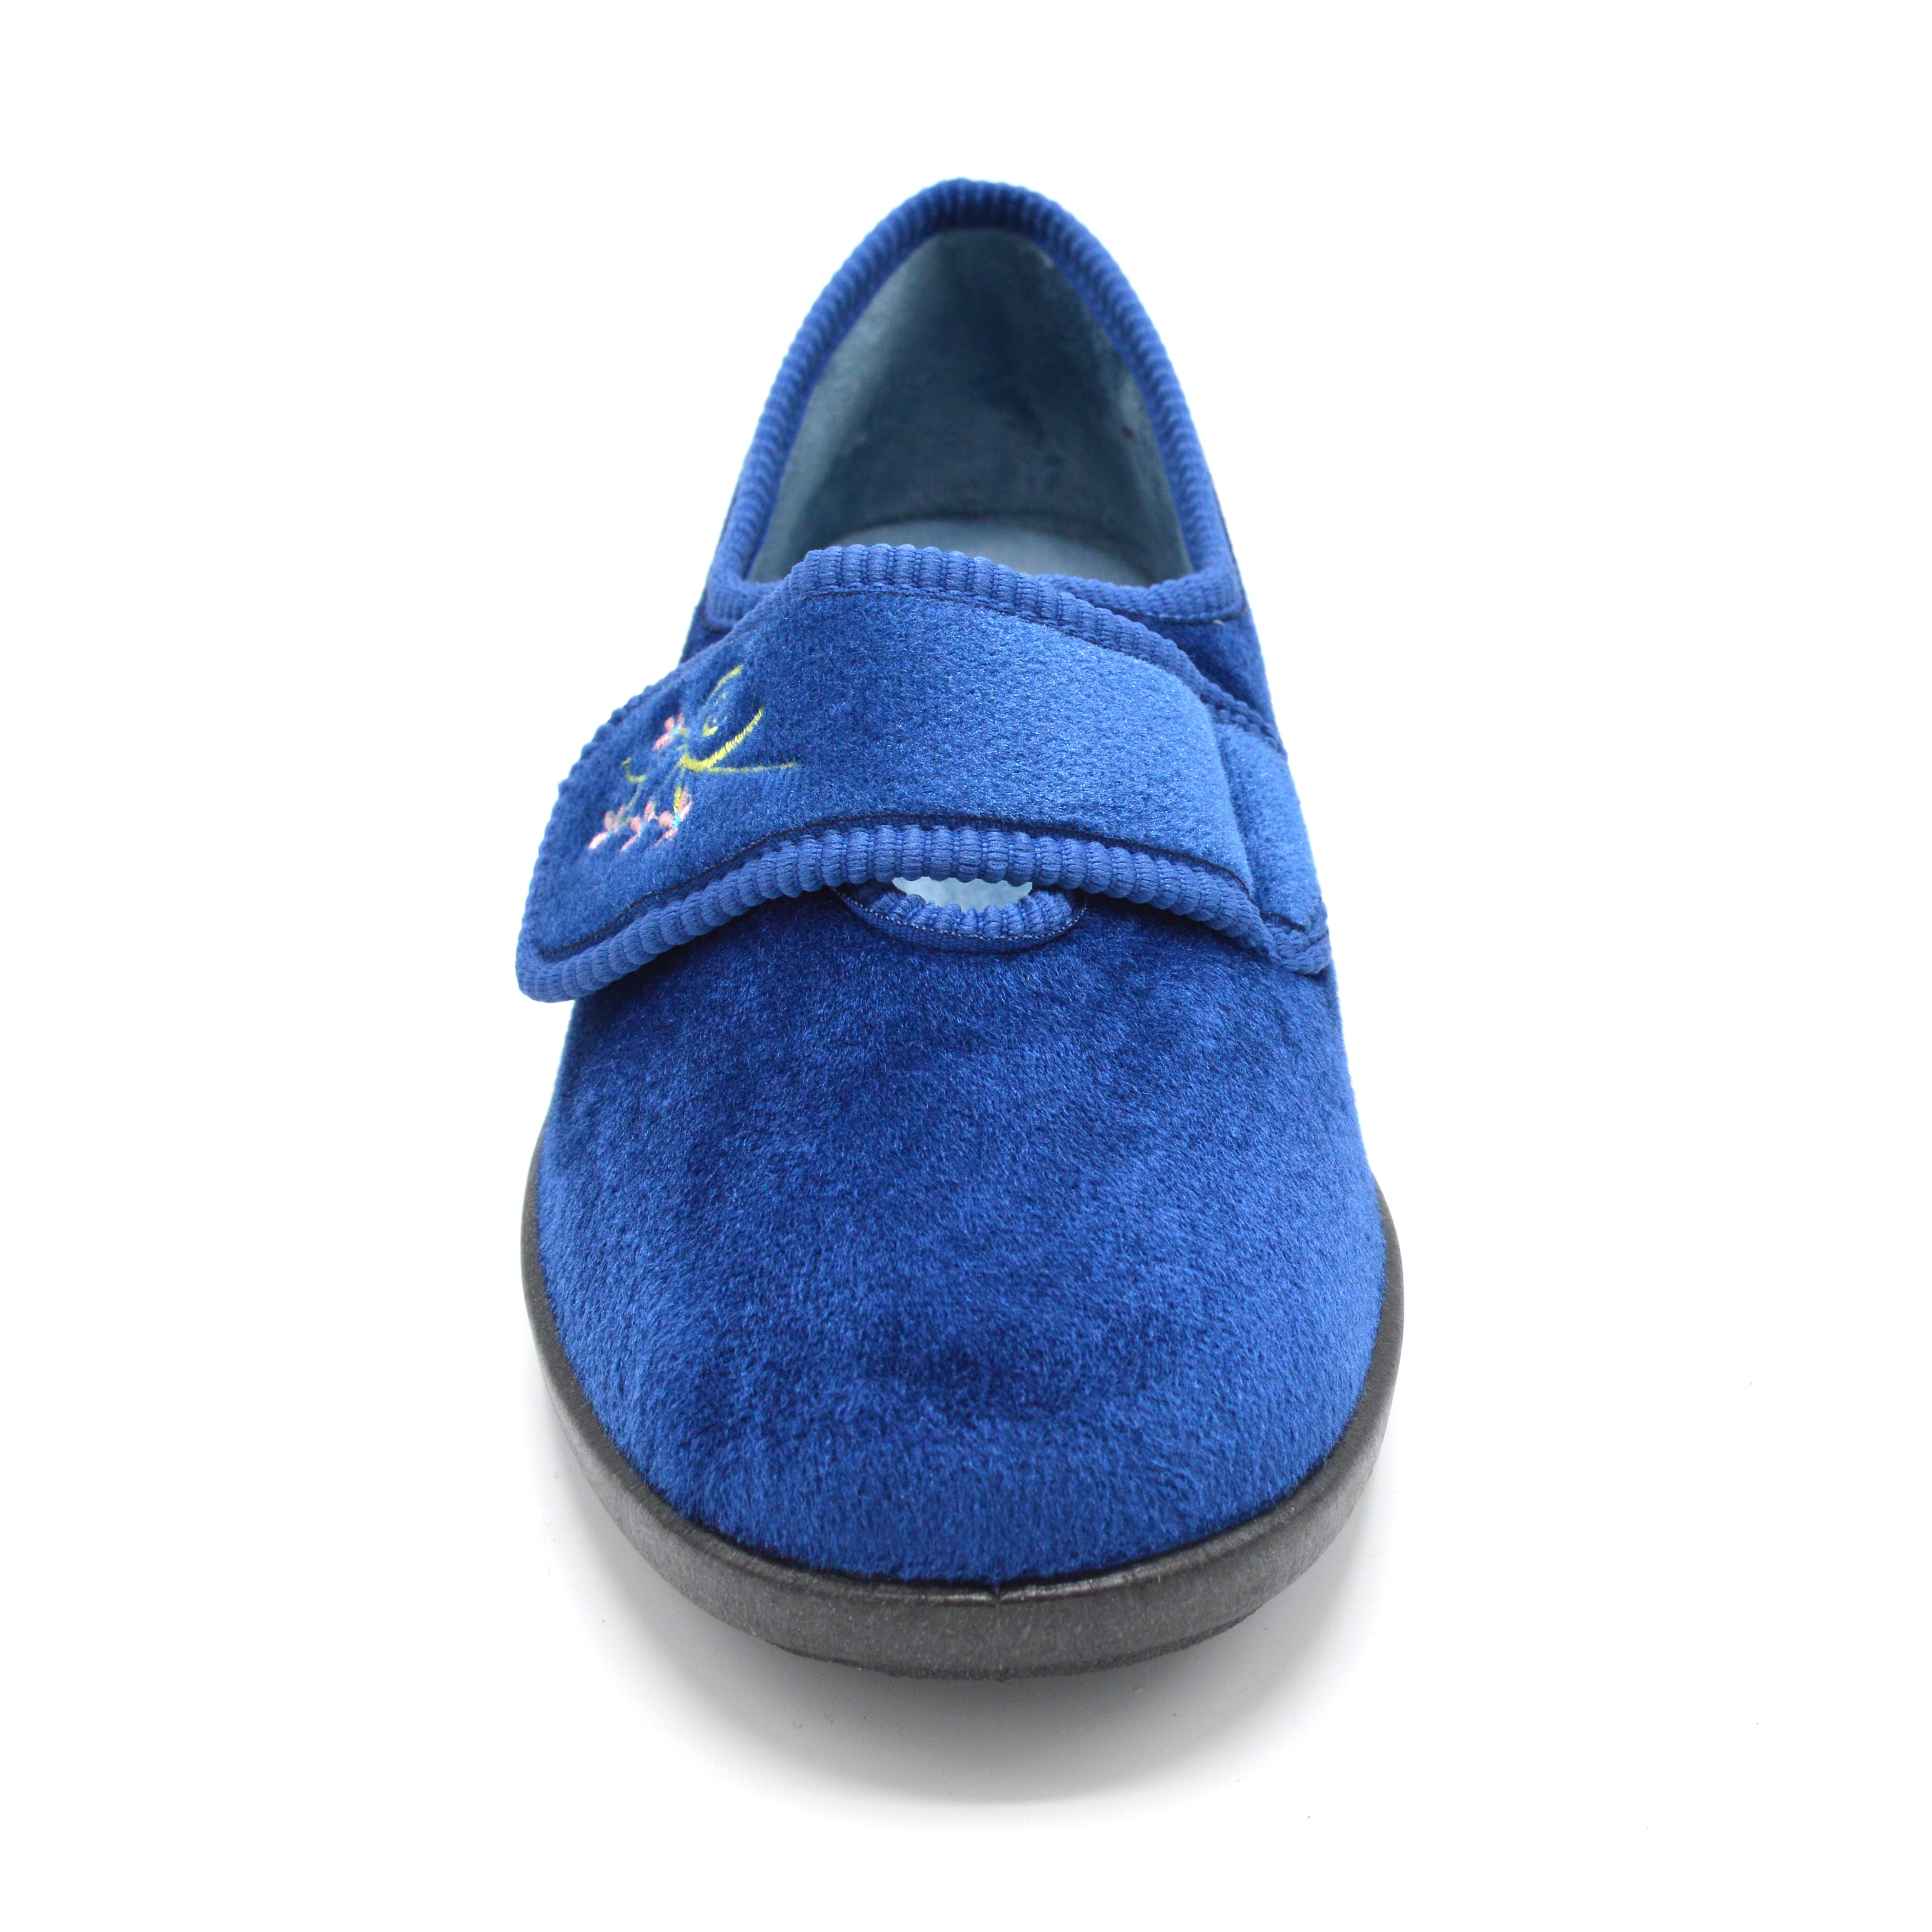 High-Quality Velcro Slippers For Diabetes